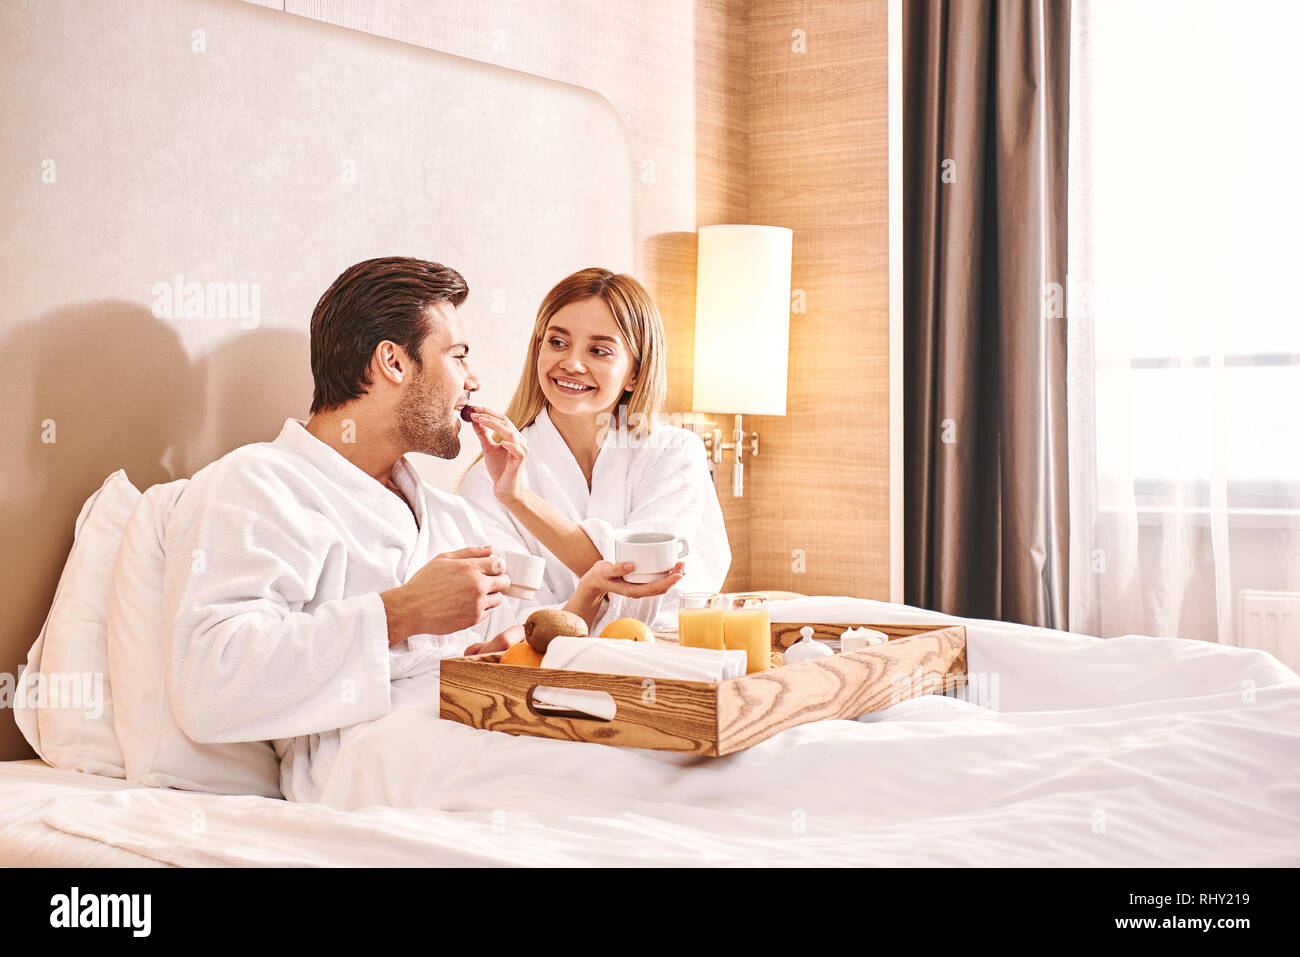 Feeding each other. Couple are eating in hotel room bed together. Love story. Stock Photo